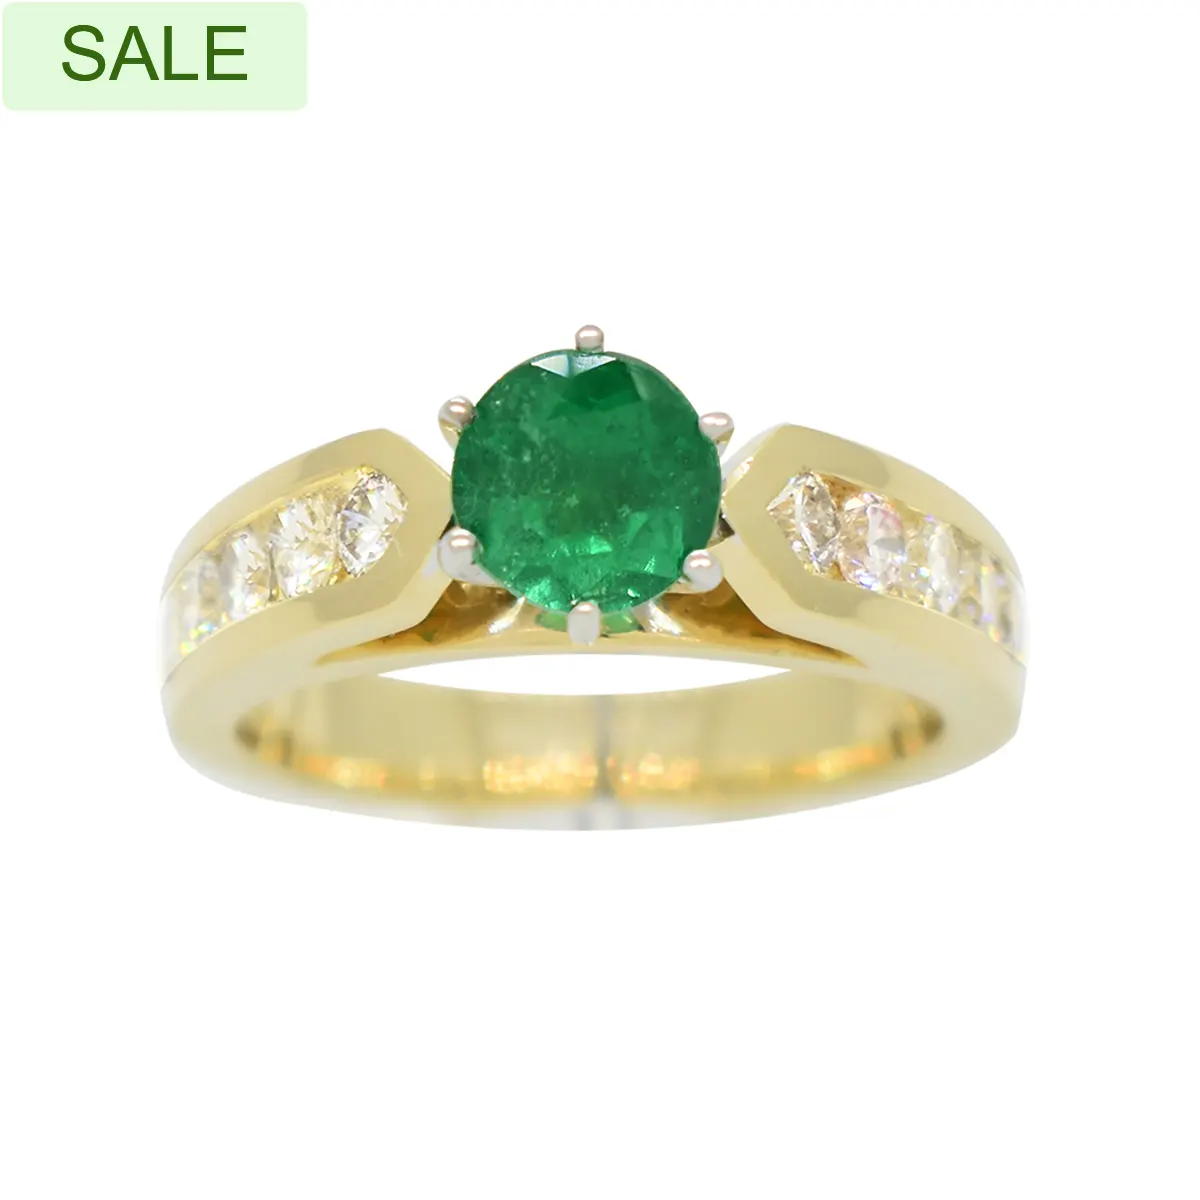 emerald-engagement-ring-in-2-tones-gold-and-10-round-diamonds-in-cathedral-ring-style